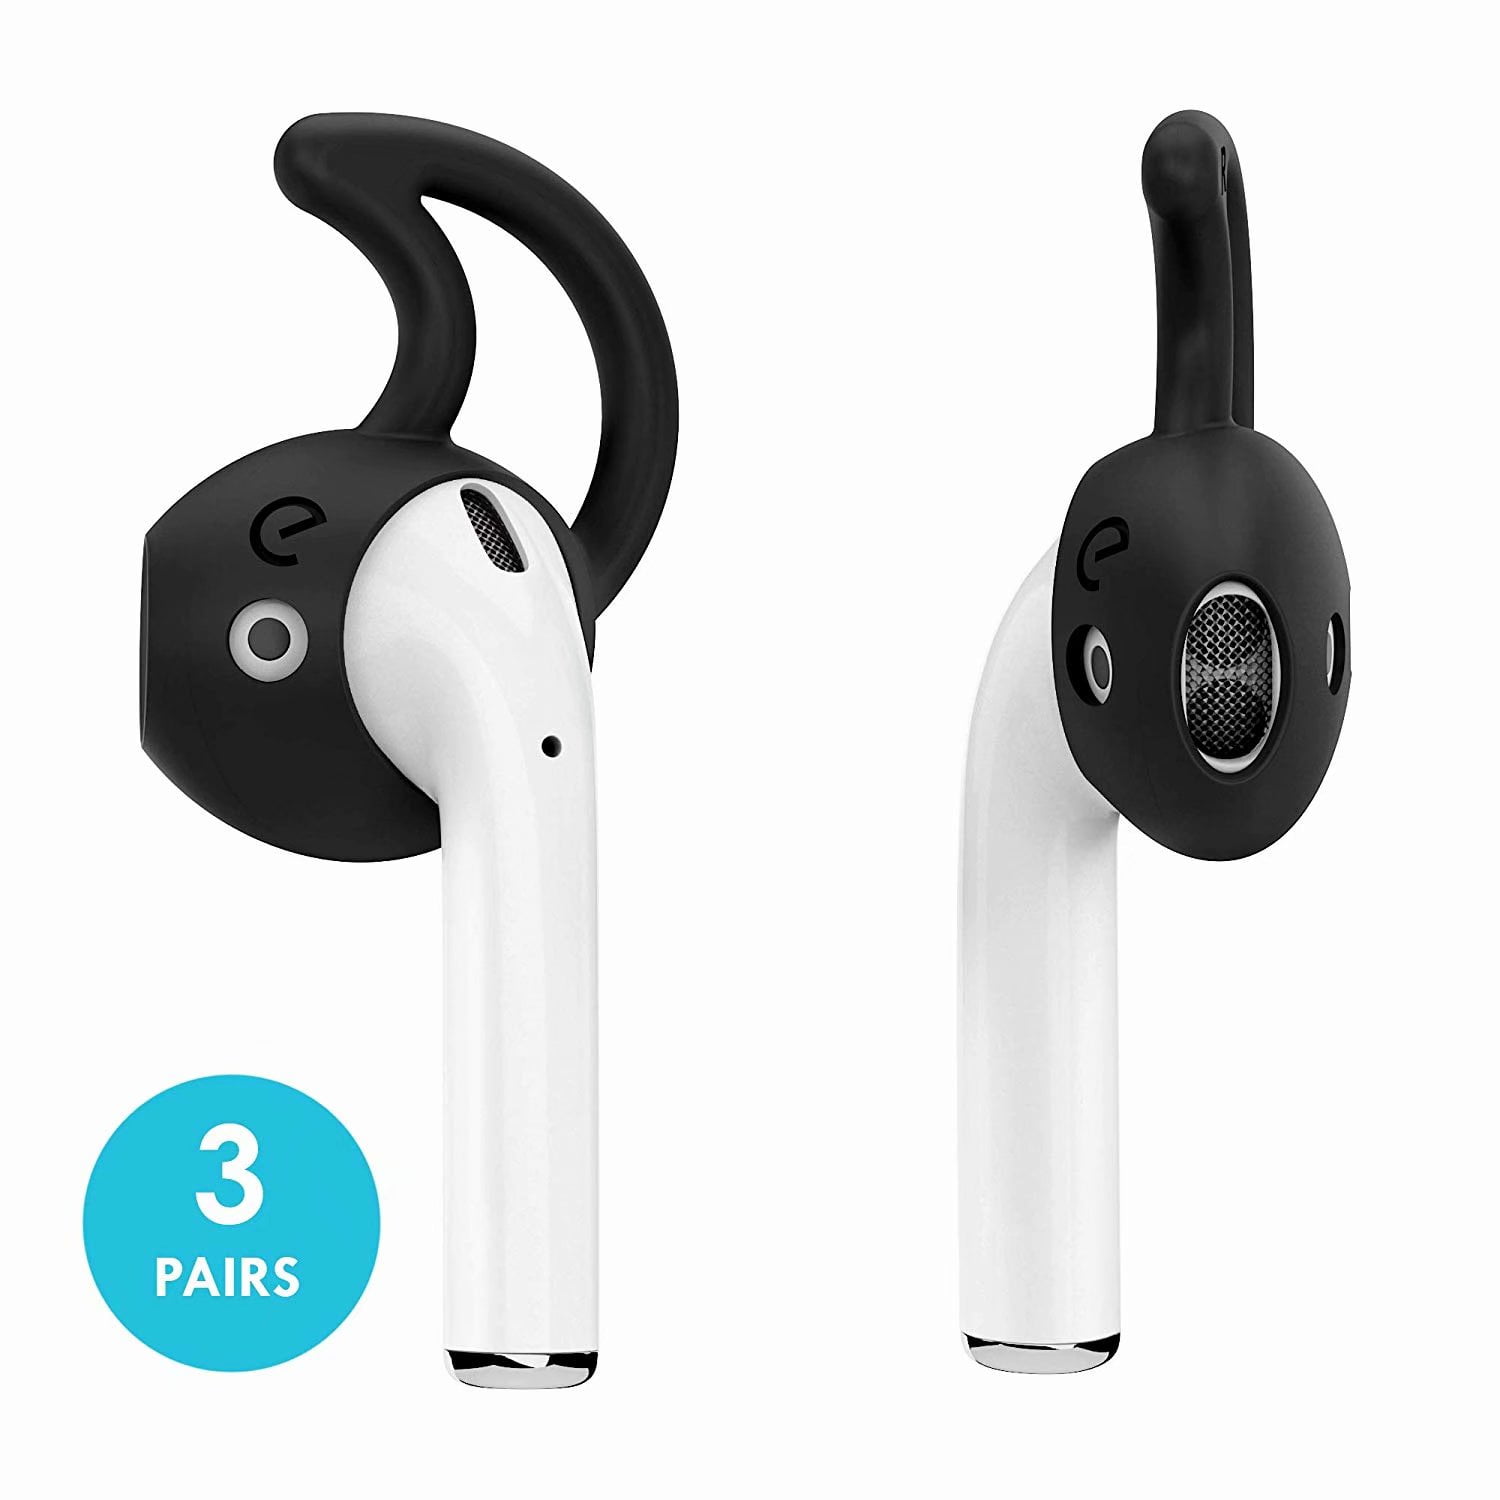 EarBuddyz 2.0 Ear Hooks and Covers Accessories Compatible with Apple  AirPods or EarPods Headphones/Earphones/Earbuds (3 Pairs) (Black)